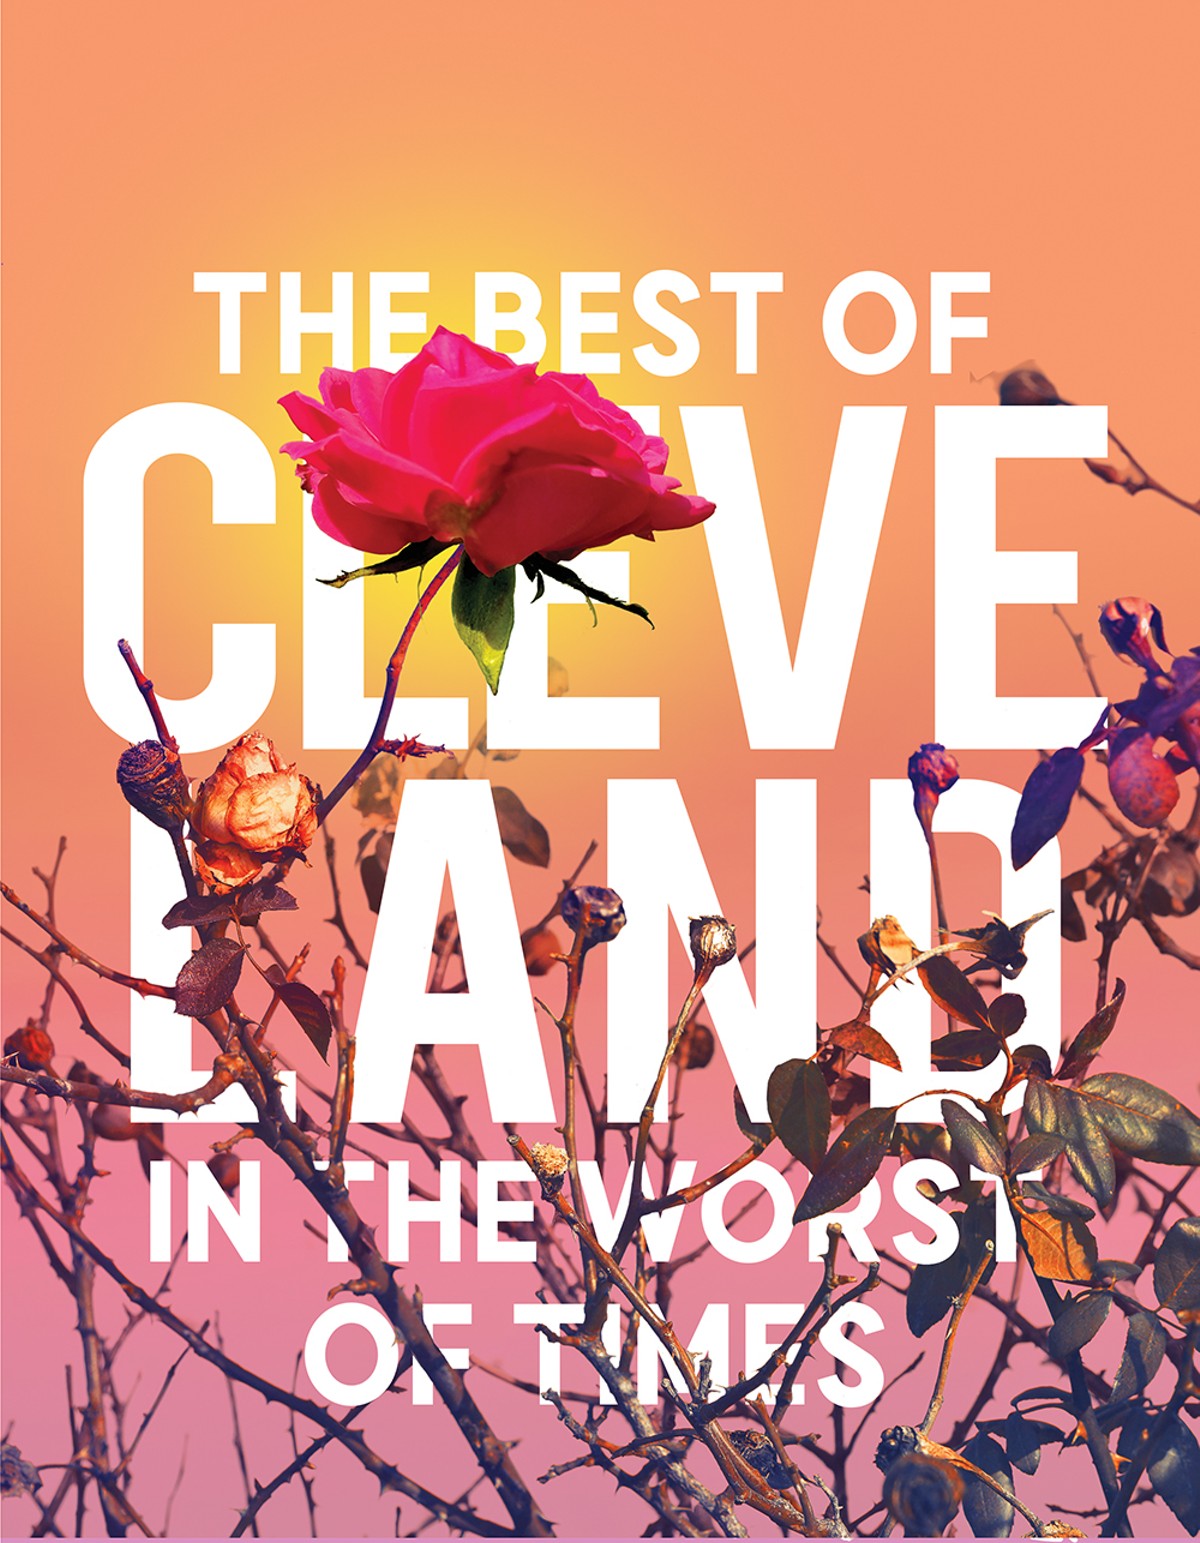 Best of Cleveland: Shops & Services